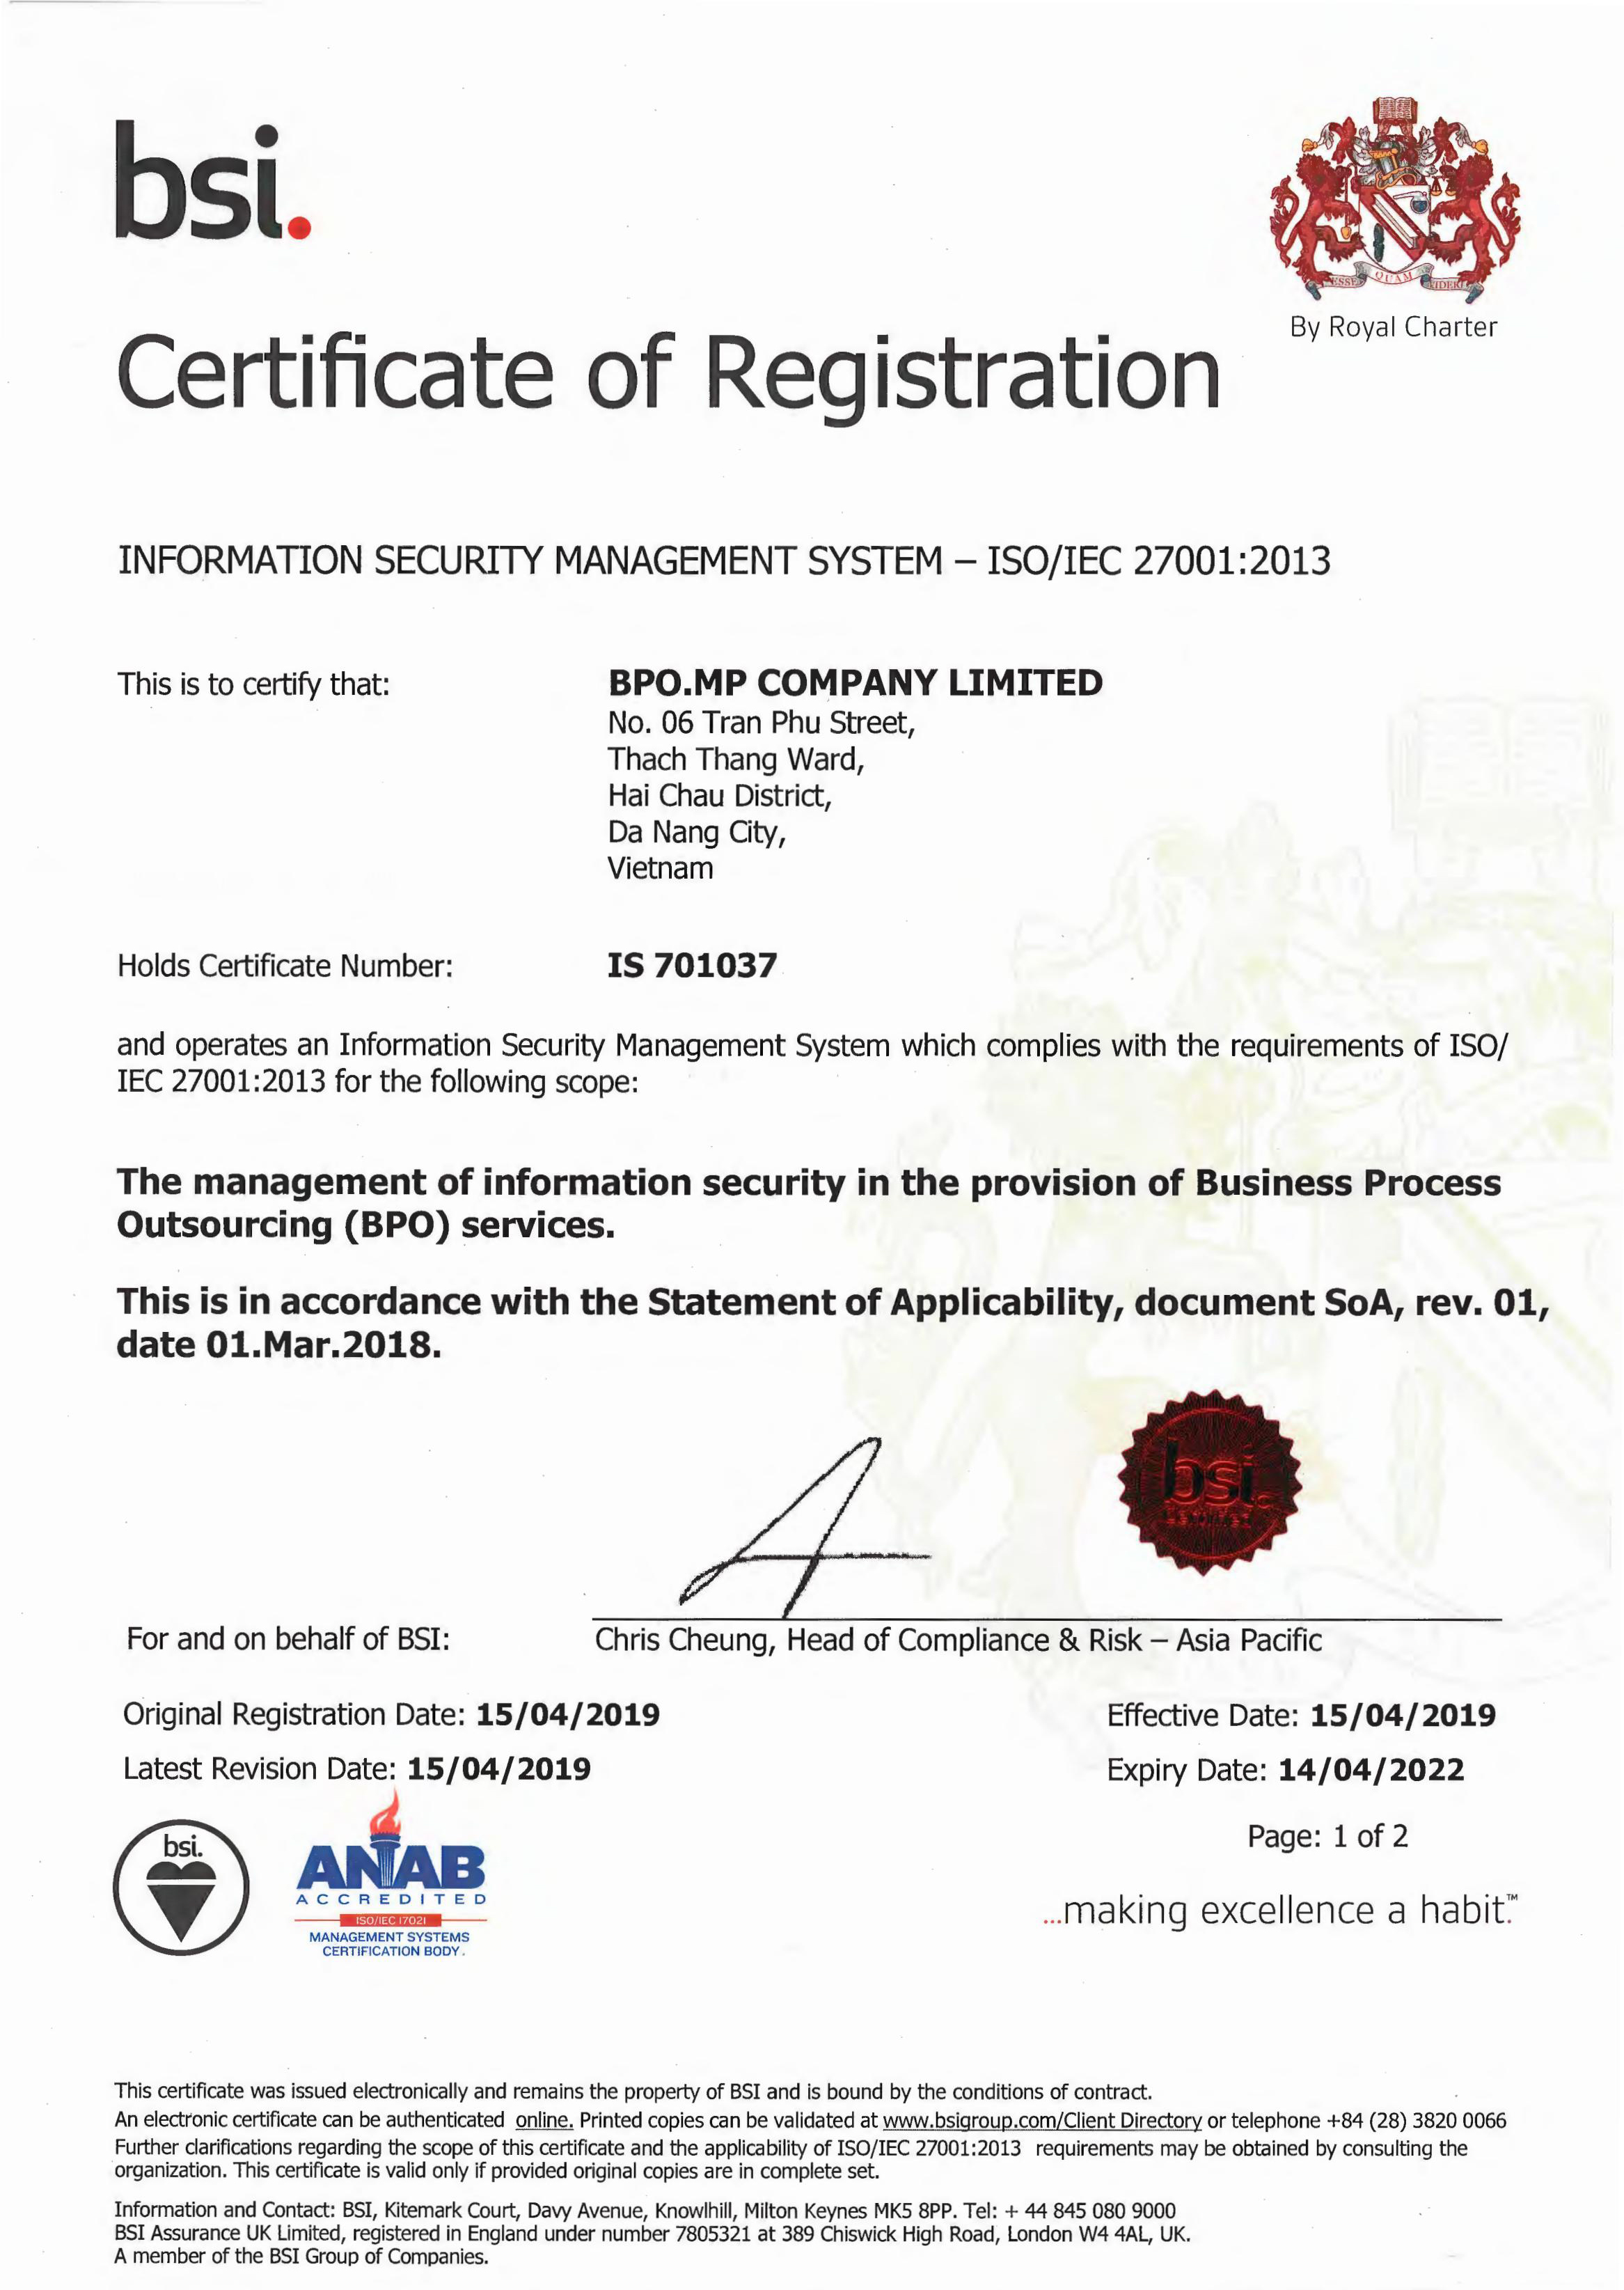 BPO.MP Achieved Certificate Of Registration: Information Security Management System – ISO/IEC 27001:2013